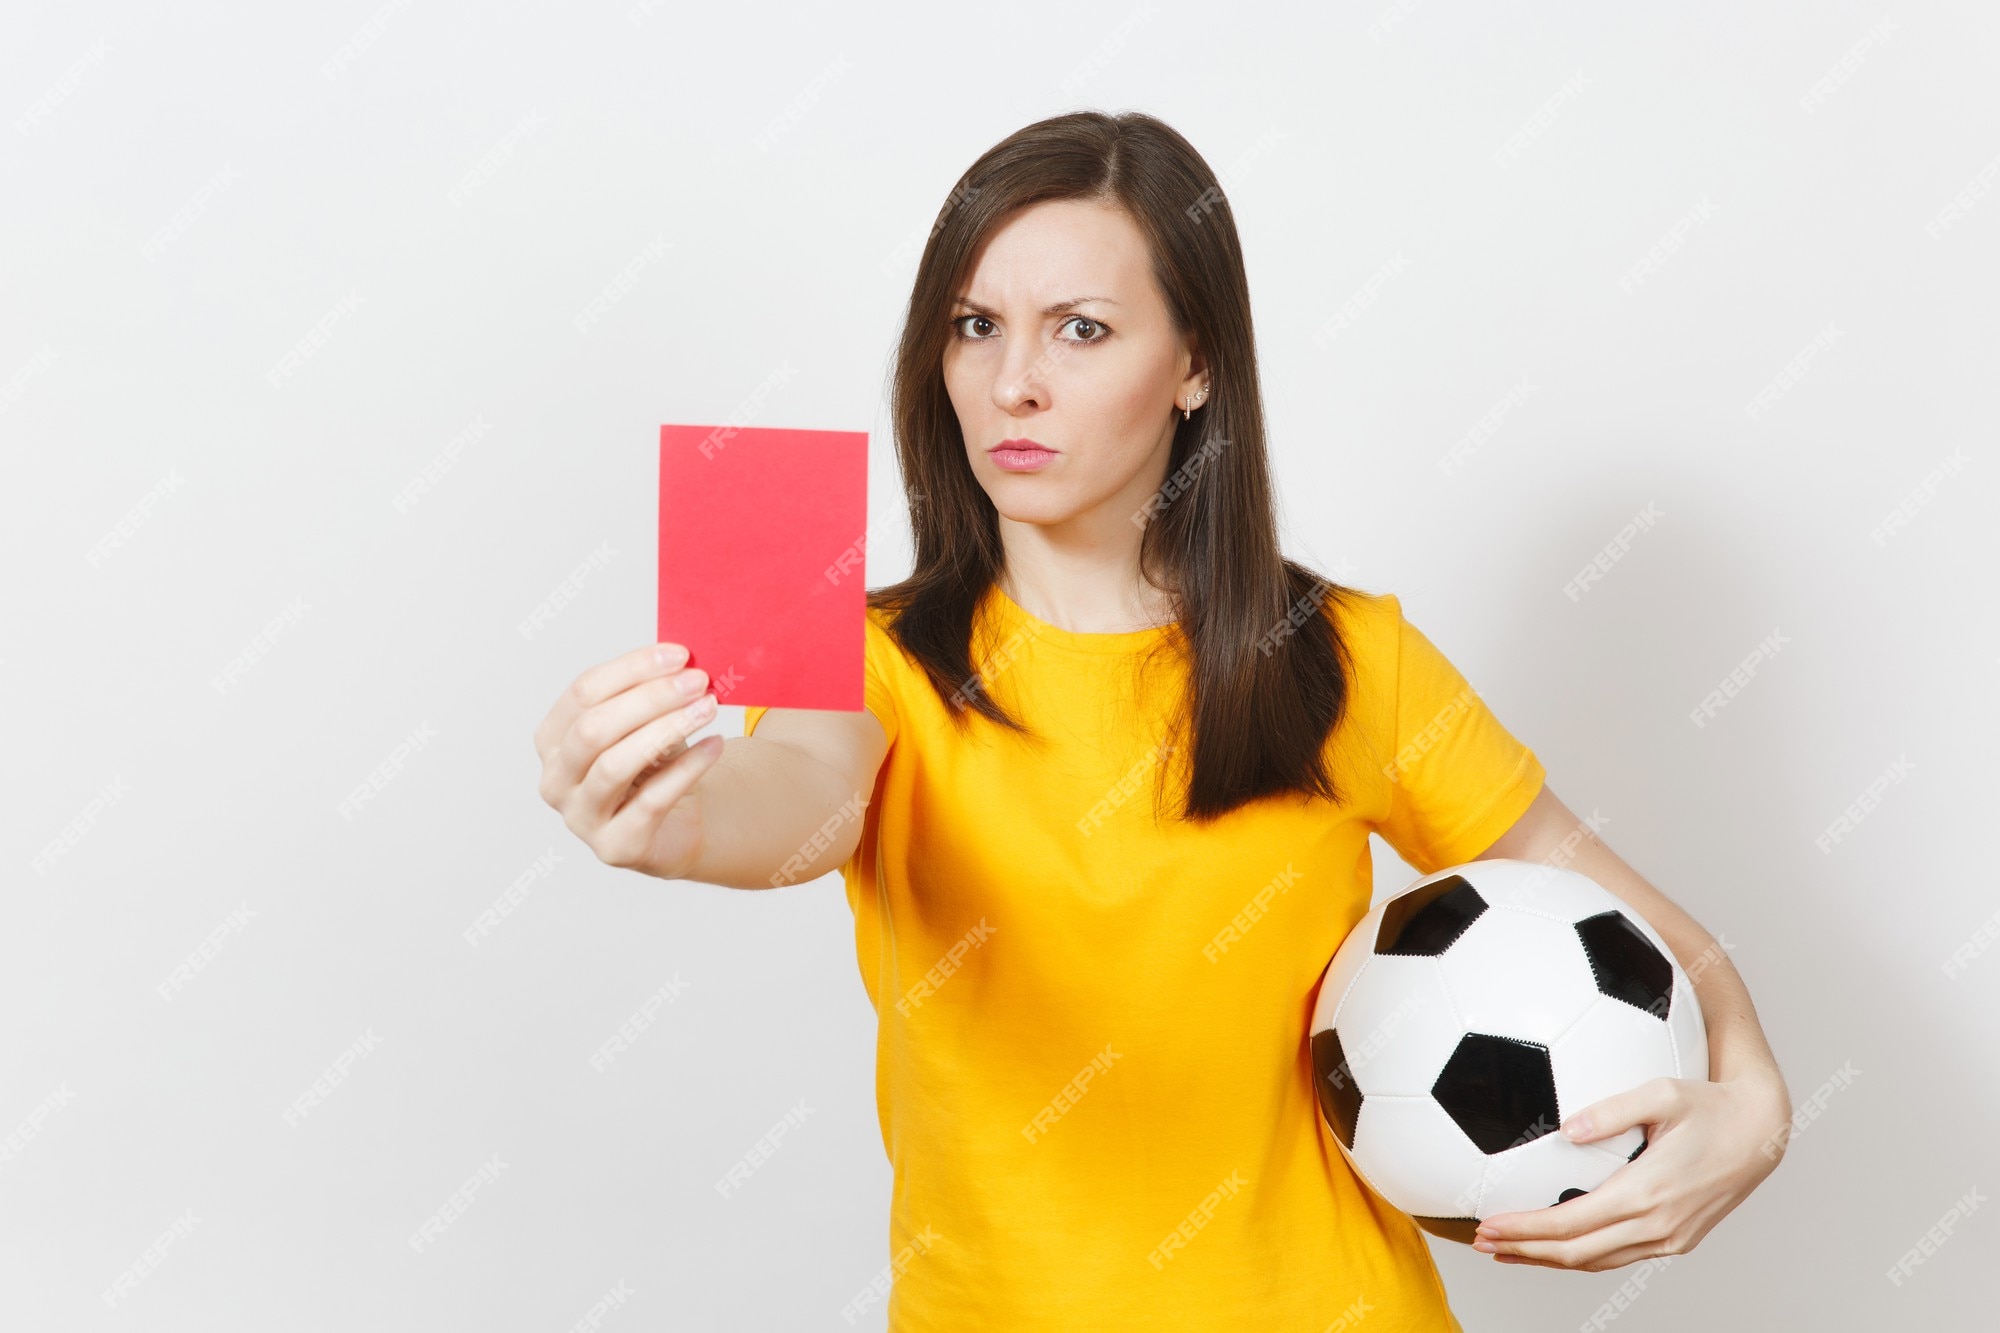 european-serious-severe-young-woman-football-referee-player-yellow-uniform-showing-red-card-holding-soccer-ball-isolated-white-background-sport-play-football-healthy-lifestyle-concept_365776-18332.jpg